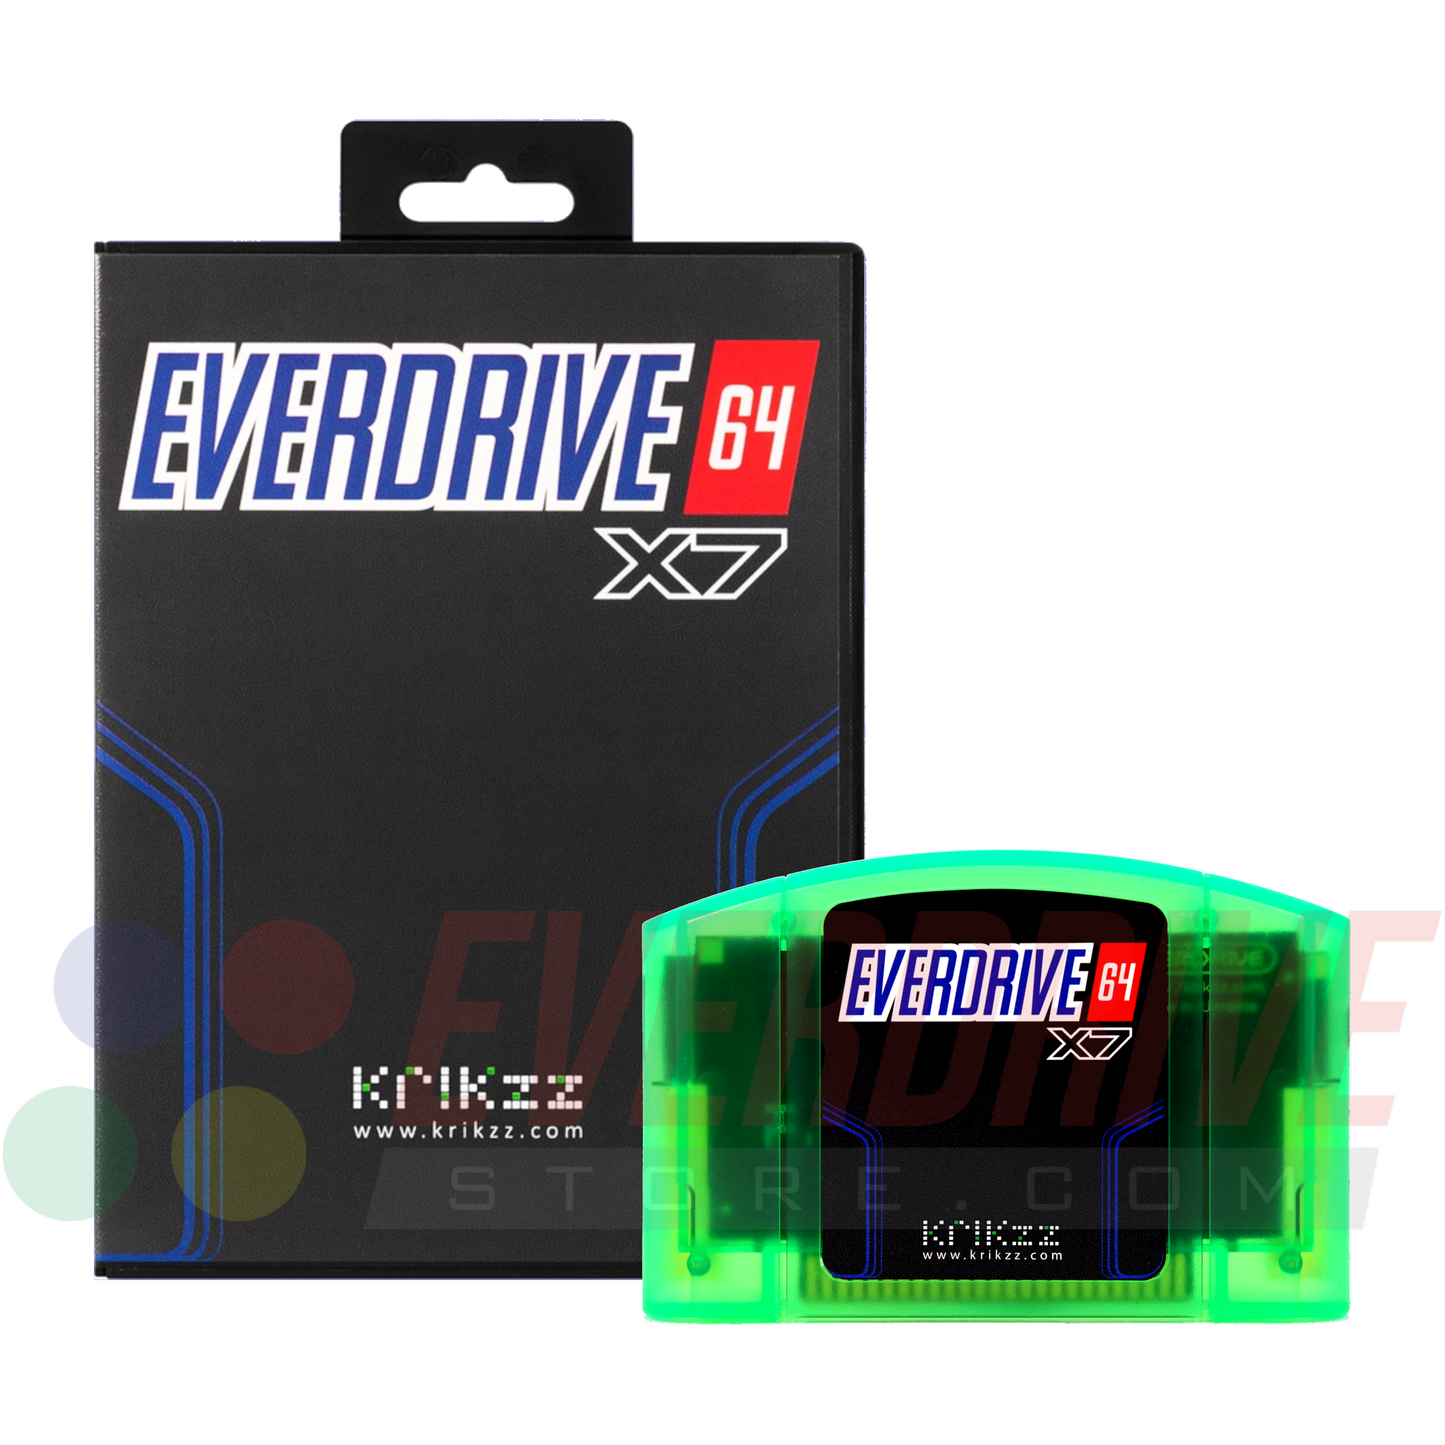 Everdrive 64 X7 - Frosted Green